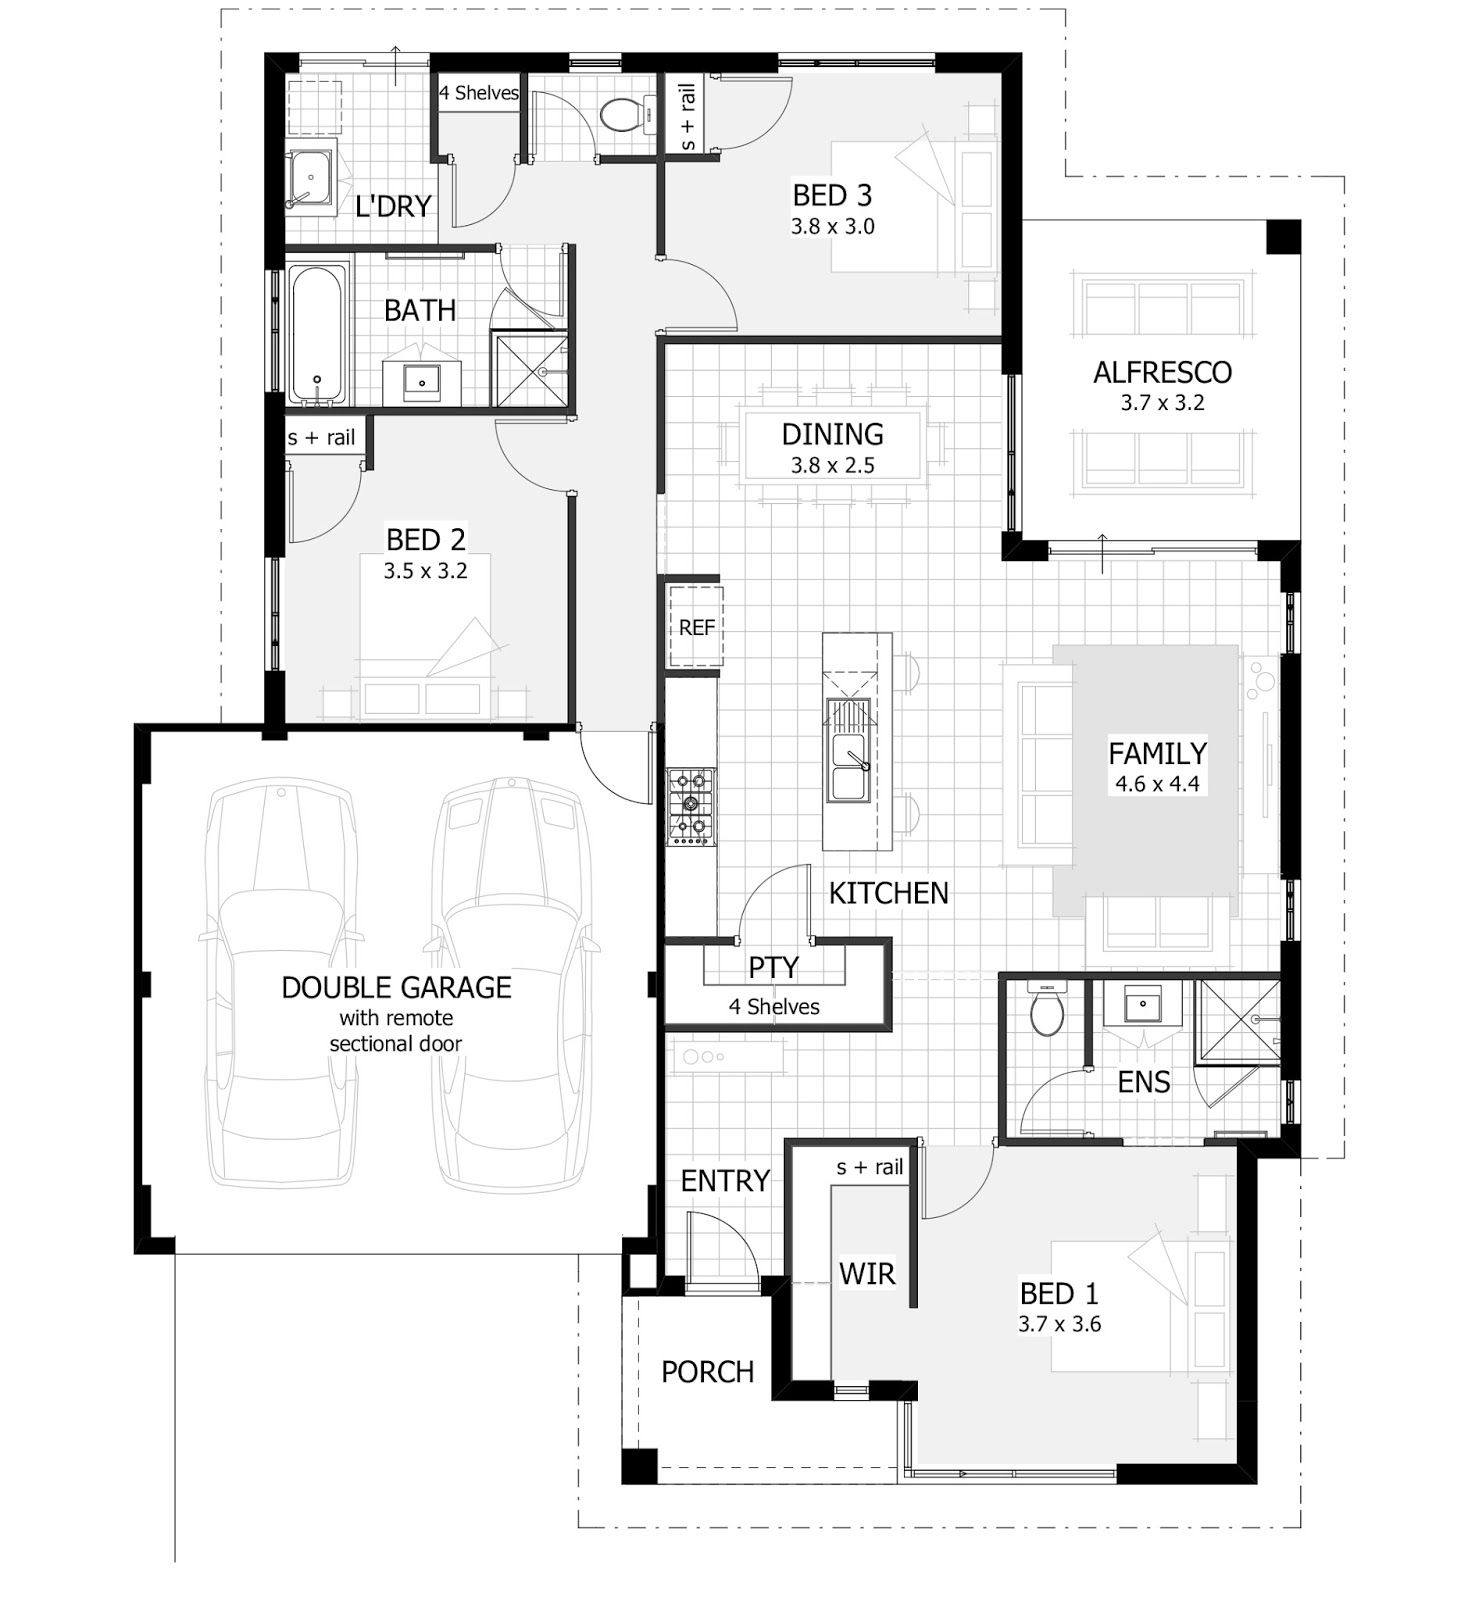 One story 3 Bedrooms and 2 Baths ground floor plan